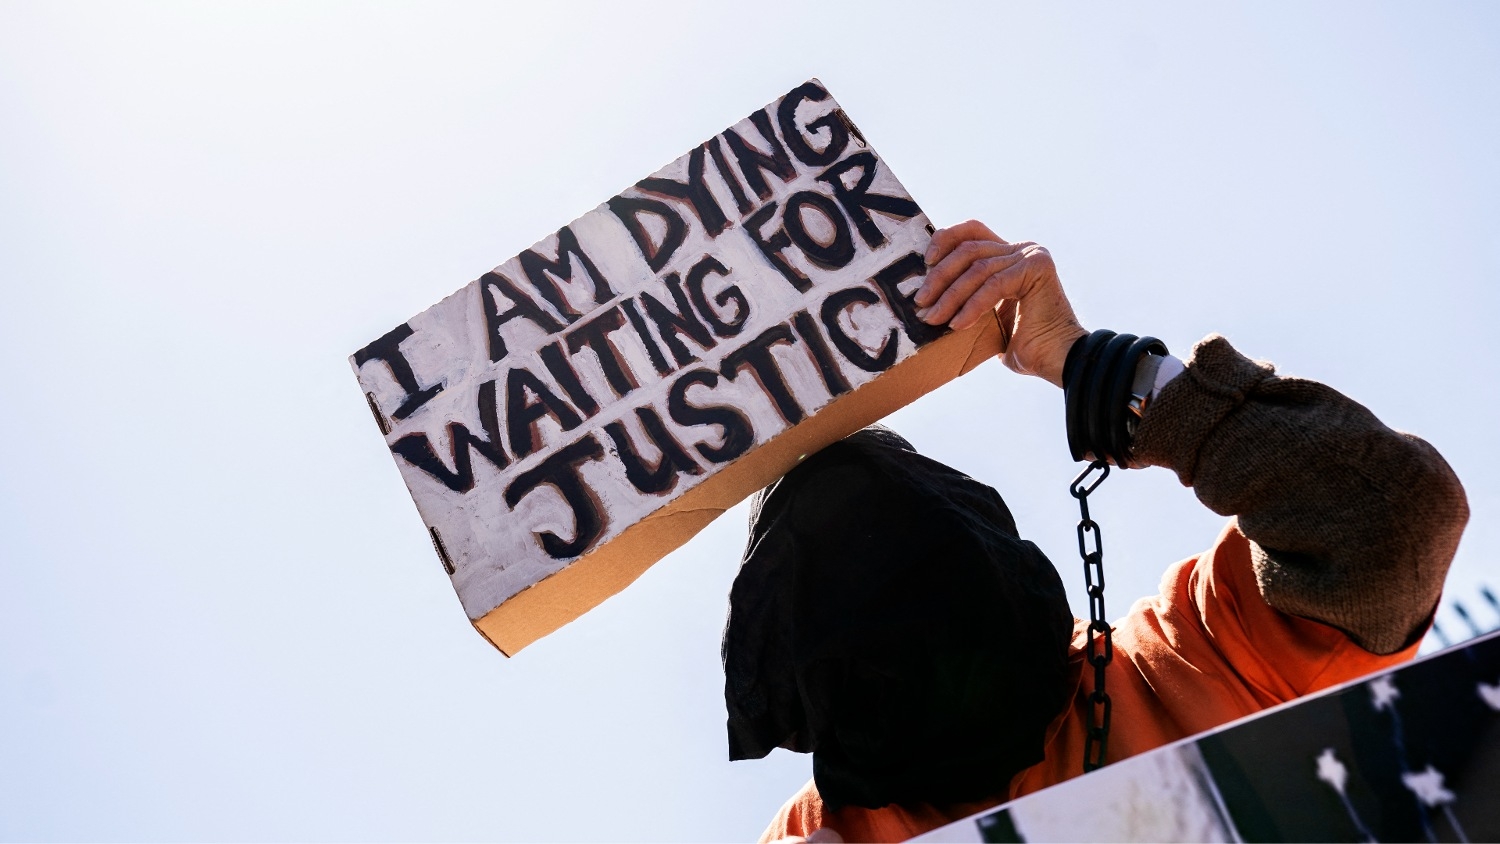 A demonstrator calling for the closure of the Guantanamo Bay detention facility holds a sign in front of the White House in Washington on 2 April 2022.